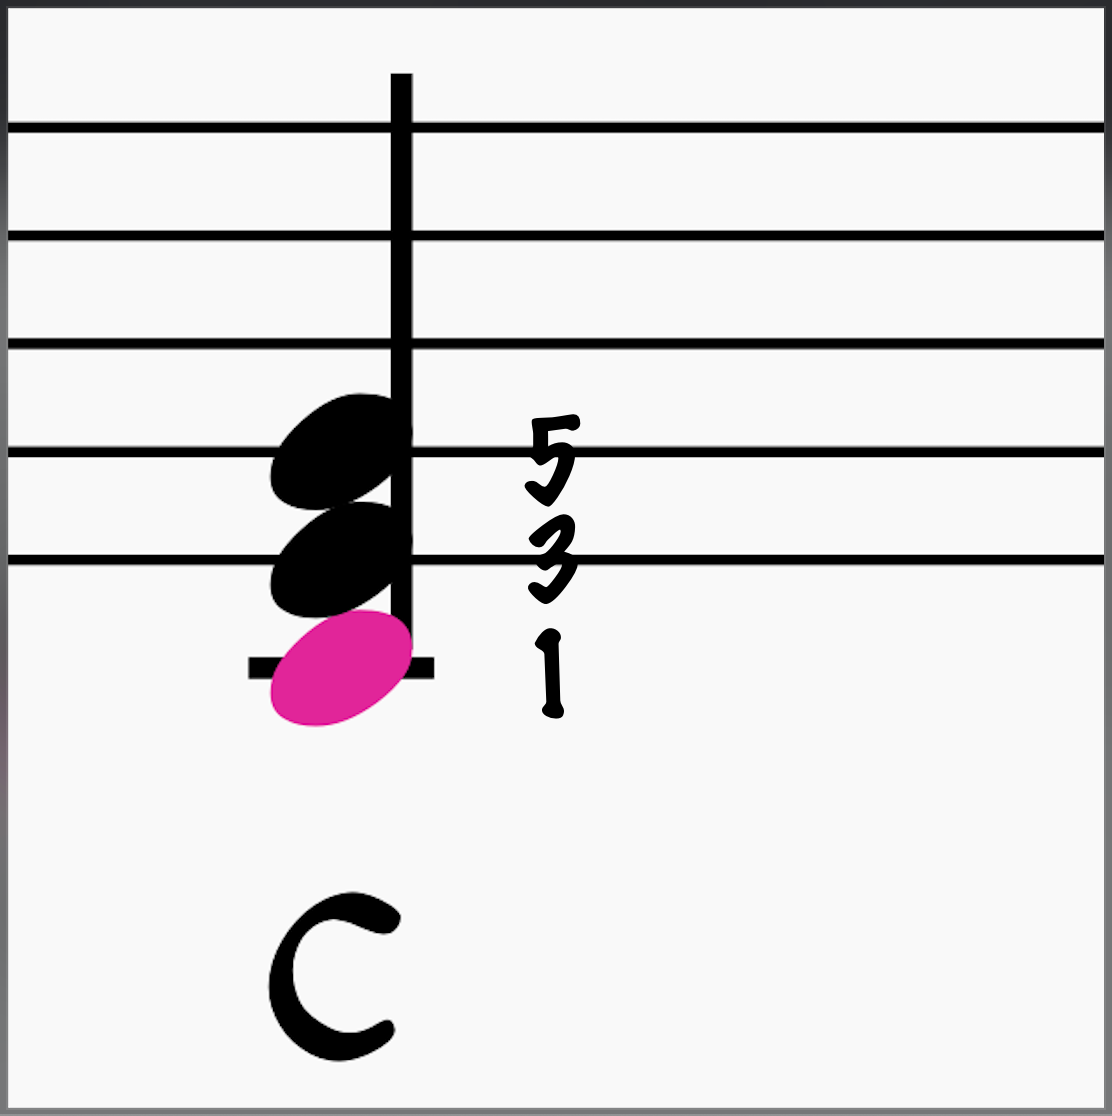 C major chord showing root, third, and fifth